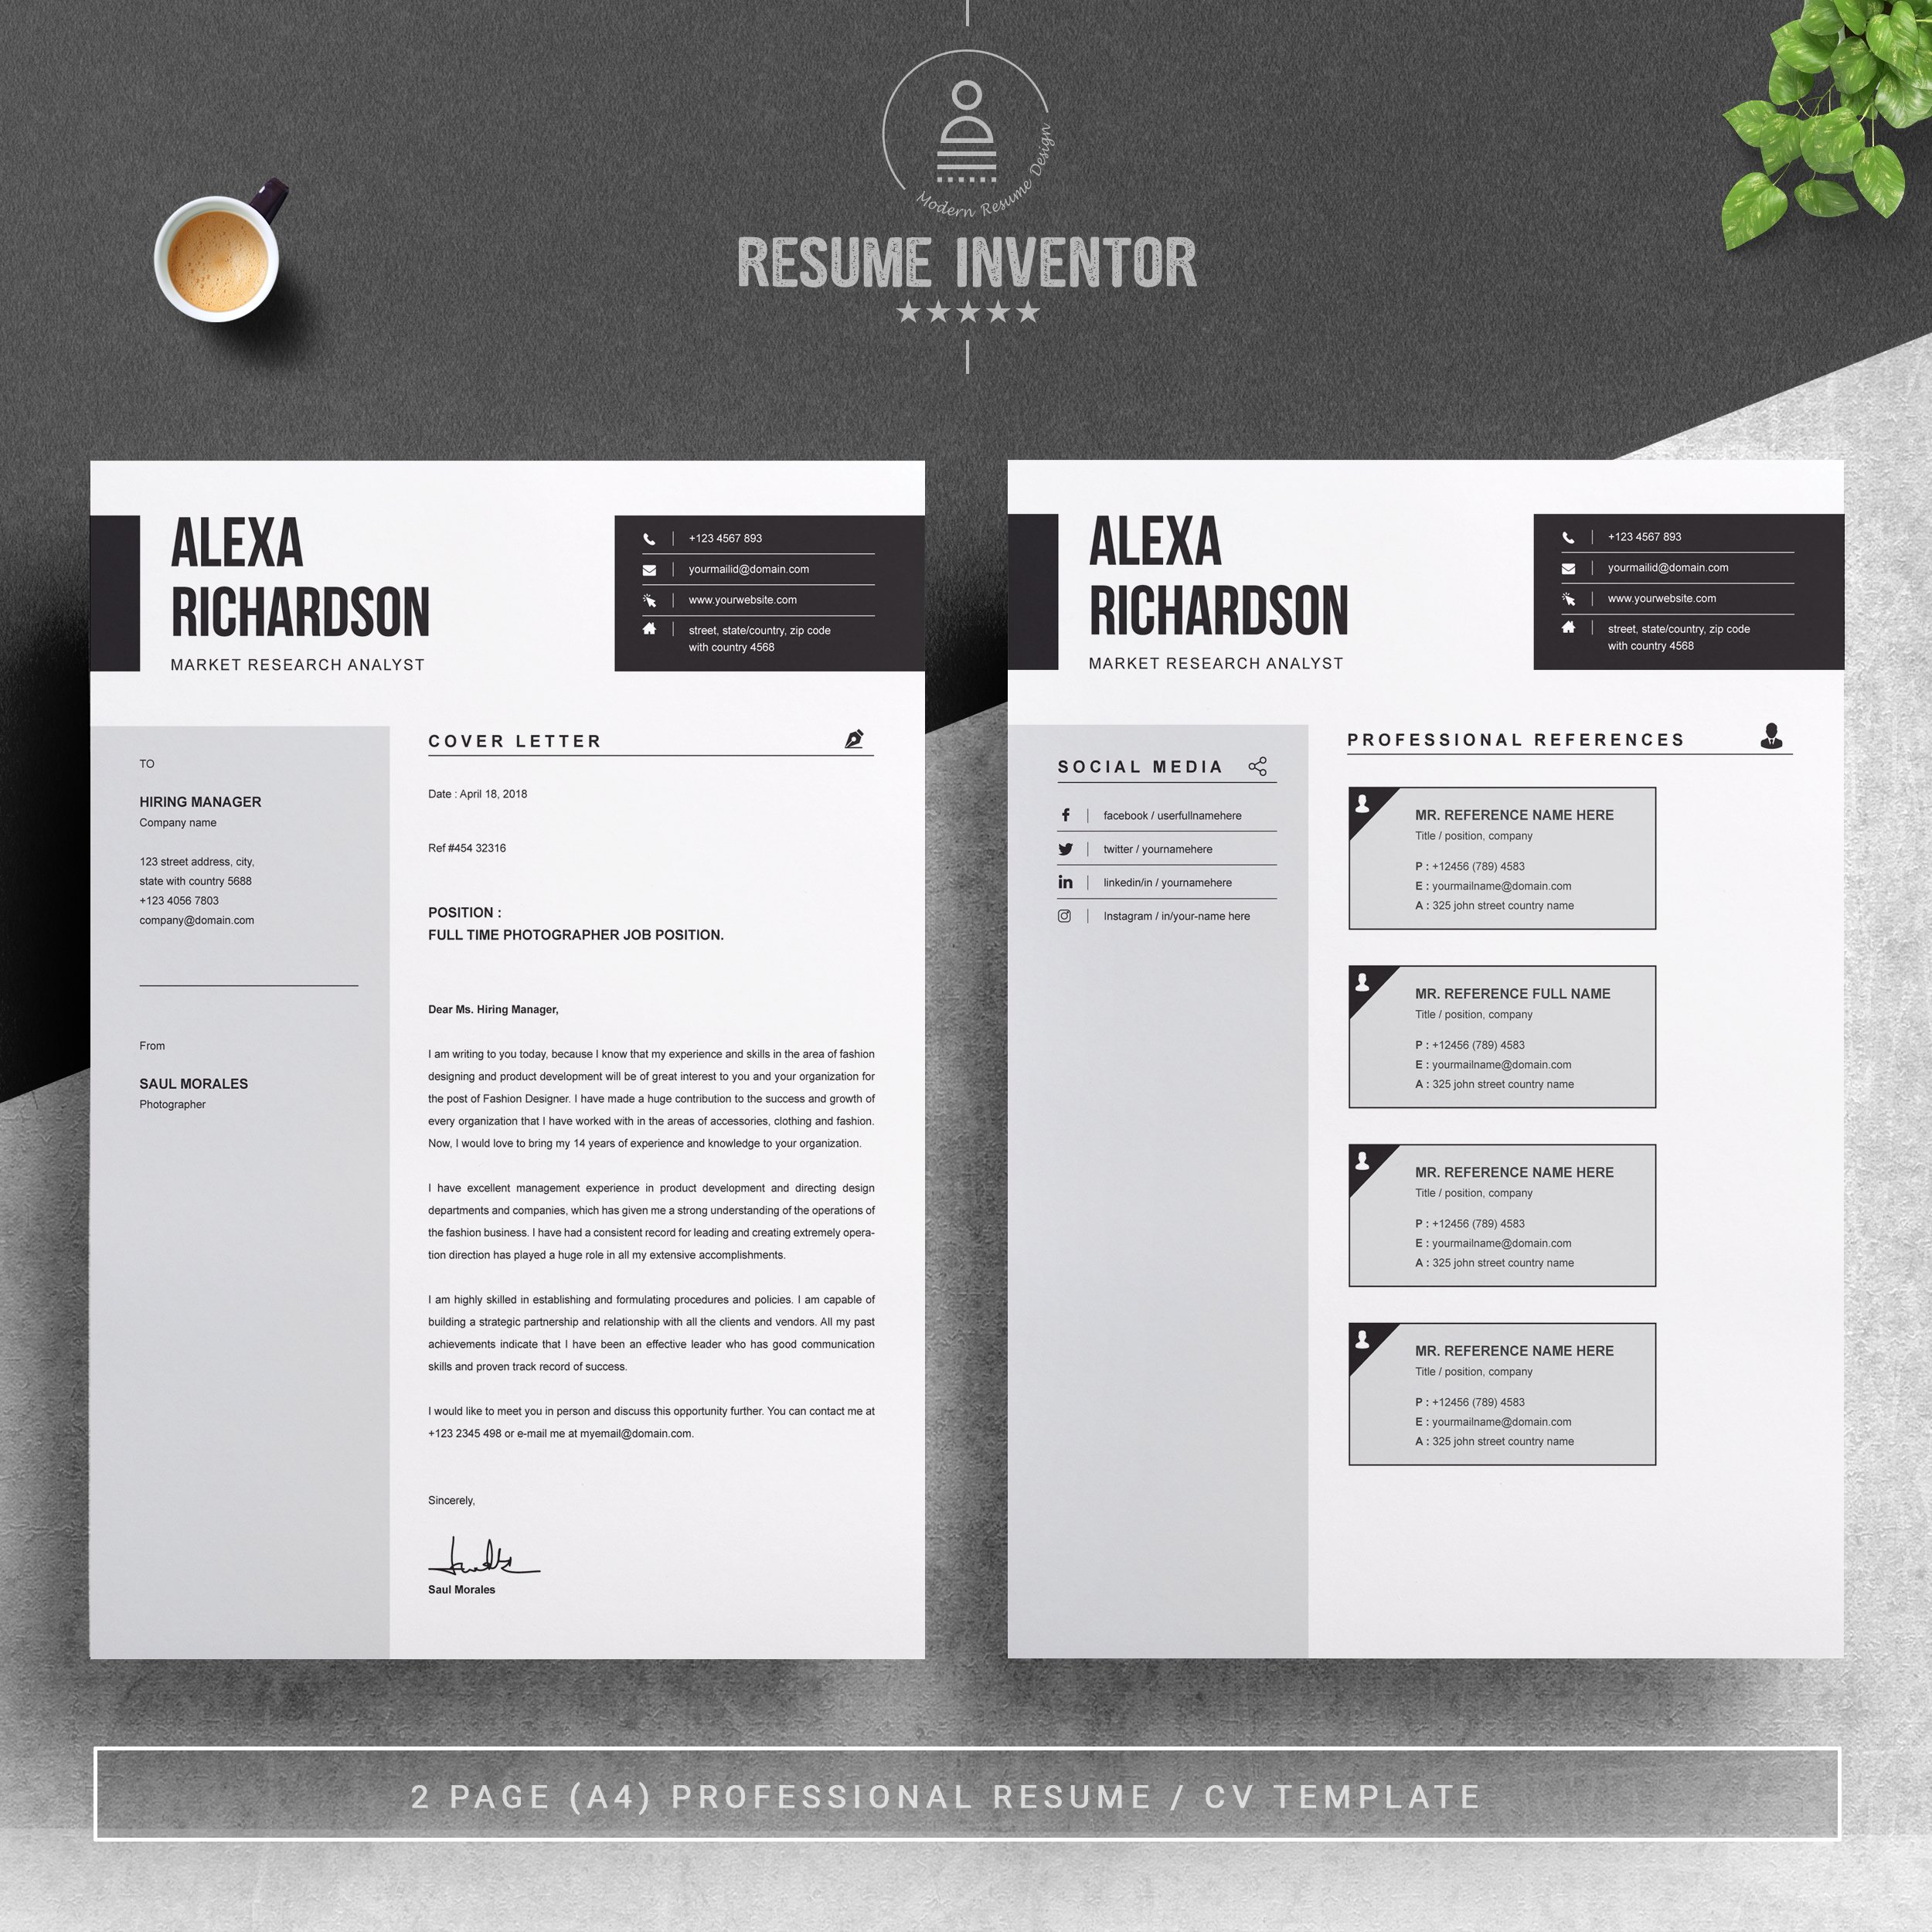 03 2 pages free resume design template 799